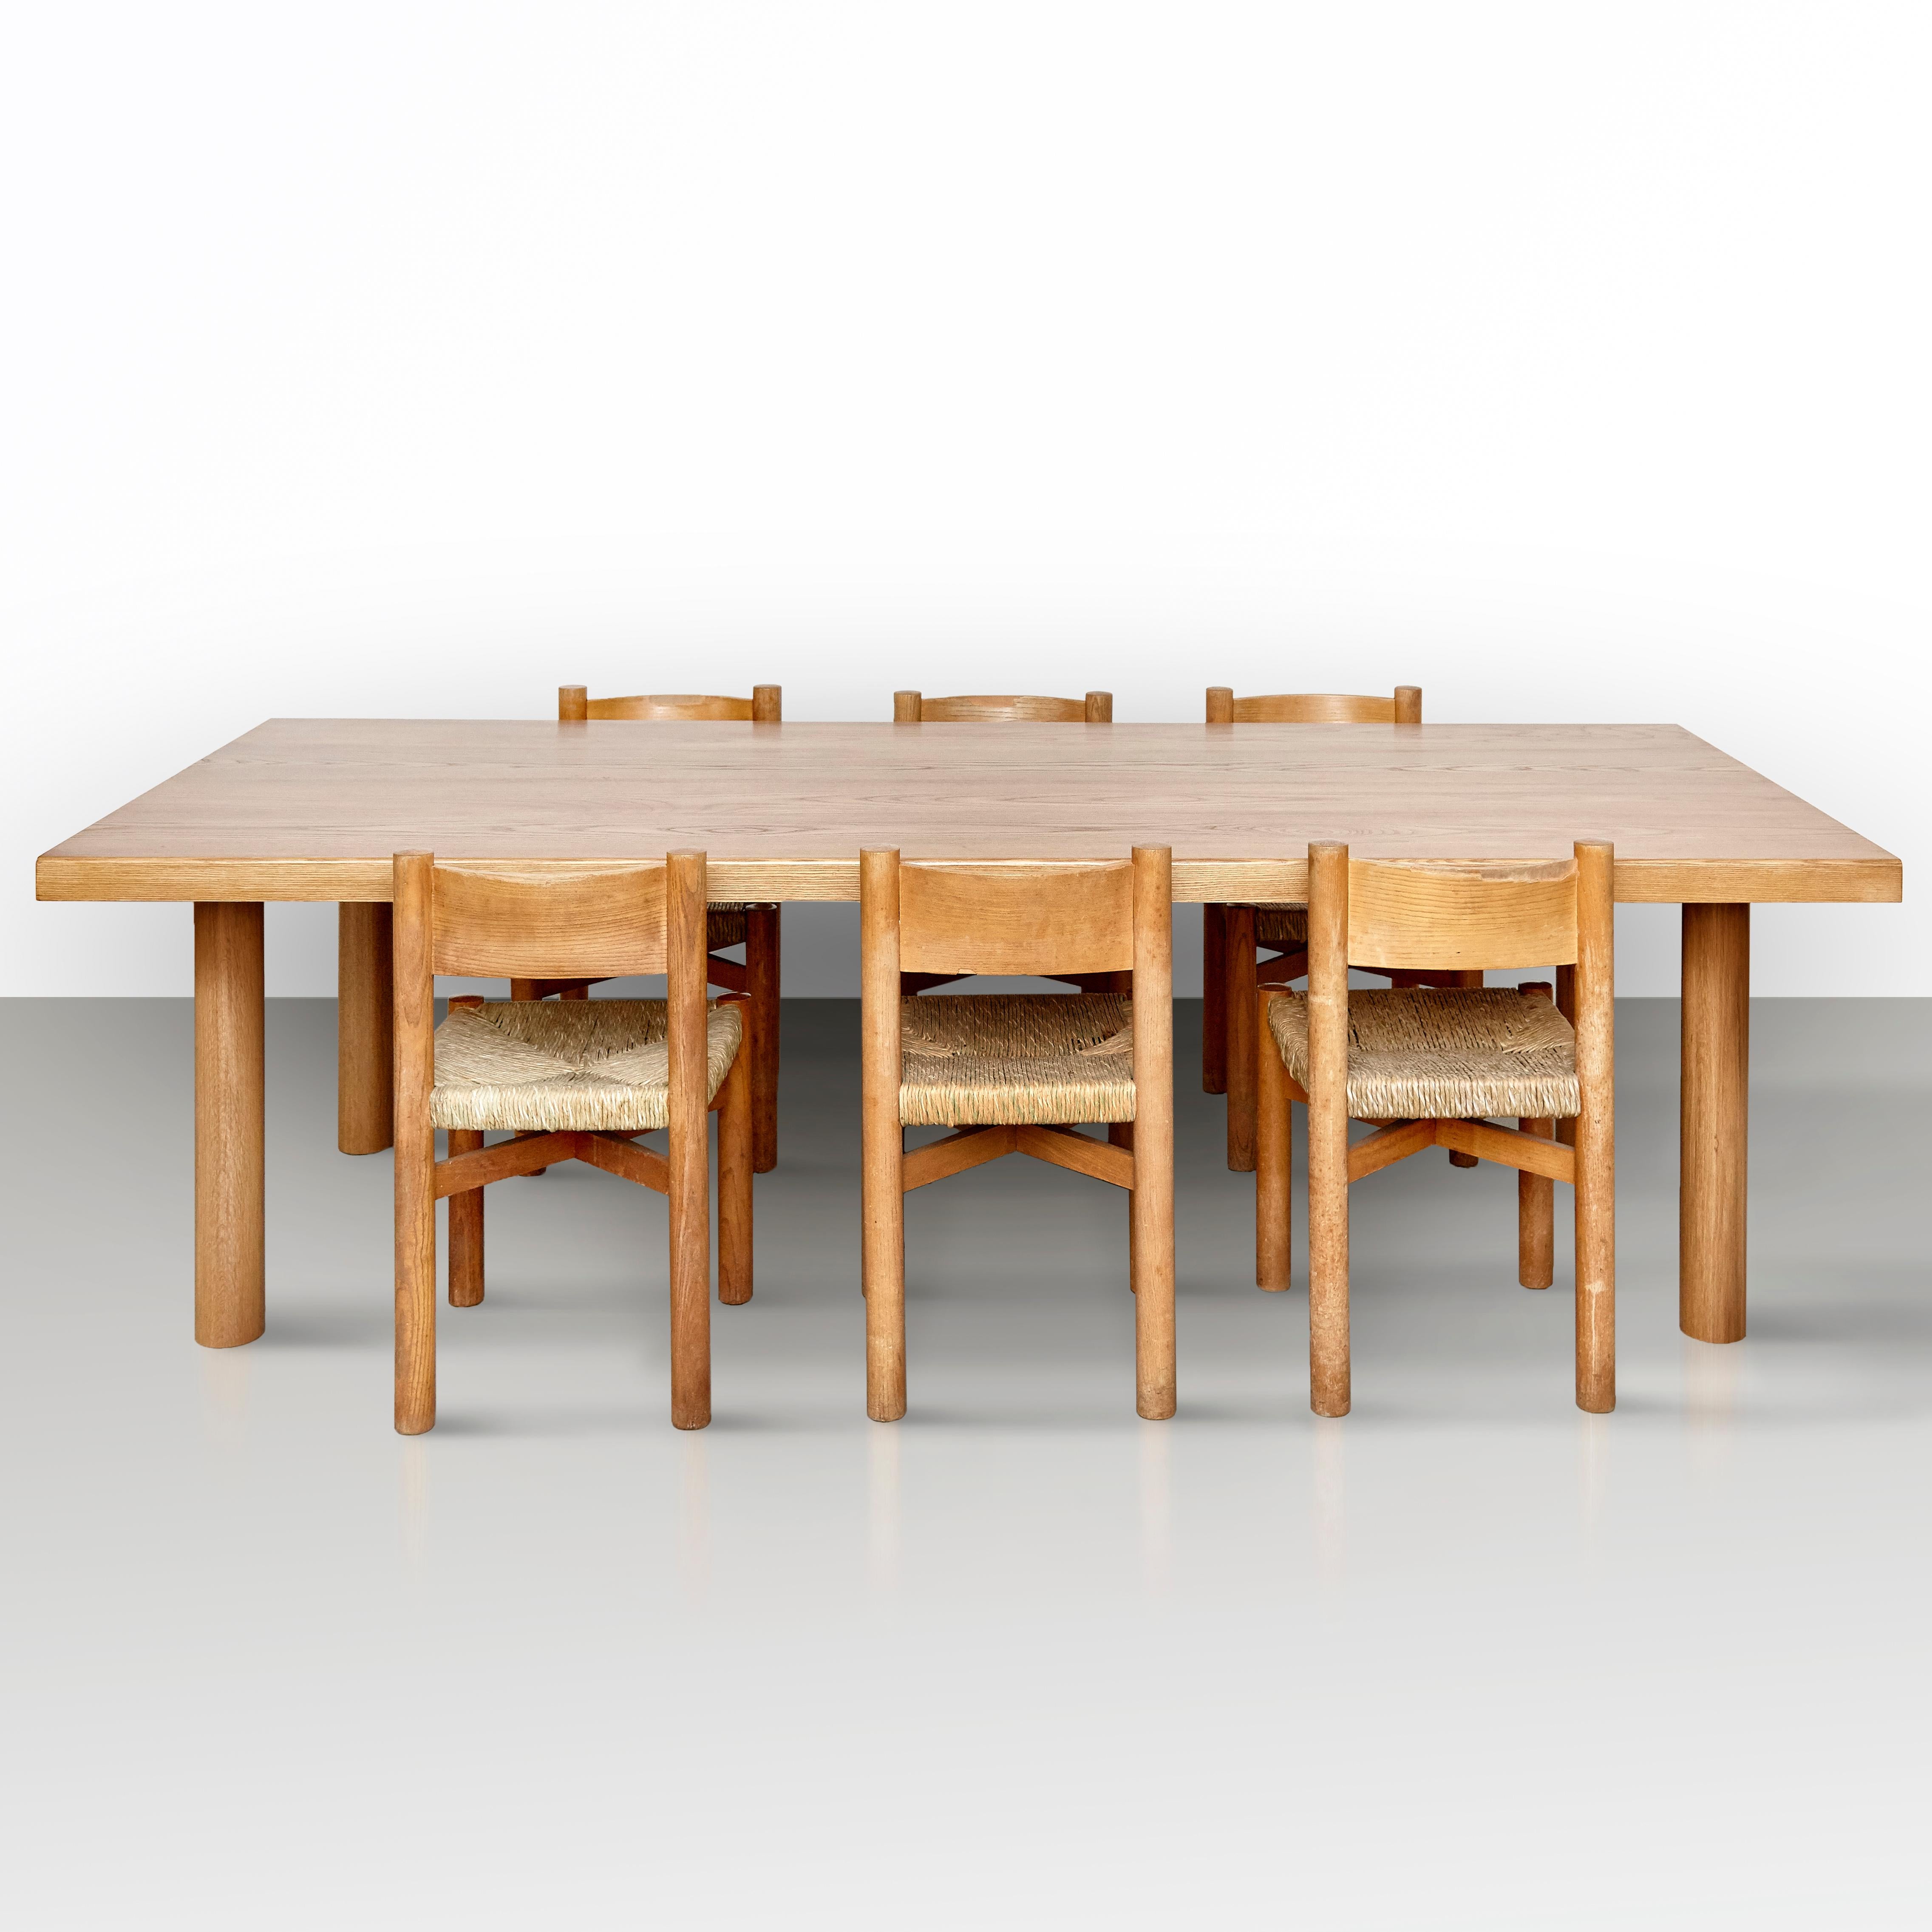 Large dining table by Dada est. manufactured in Barcelona, 2017.

Solid ash tree eight people table

Measures: 112.5 cm D x 220 cm W x 75 cm H 

Production delay: 6-8 weeks
There is the possibility of making it in different measures and